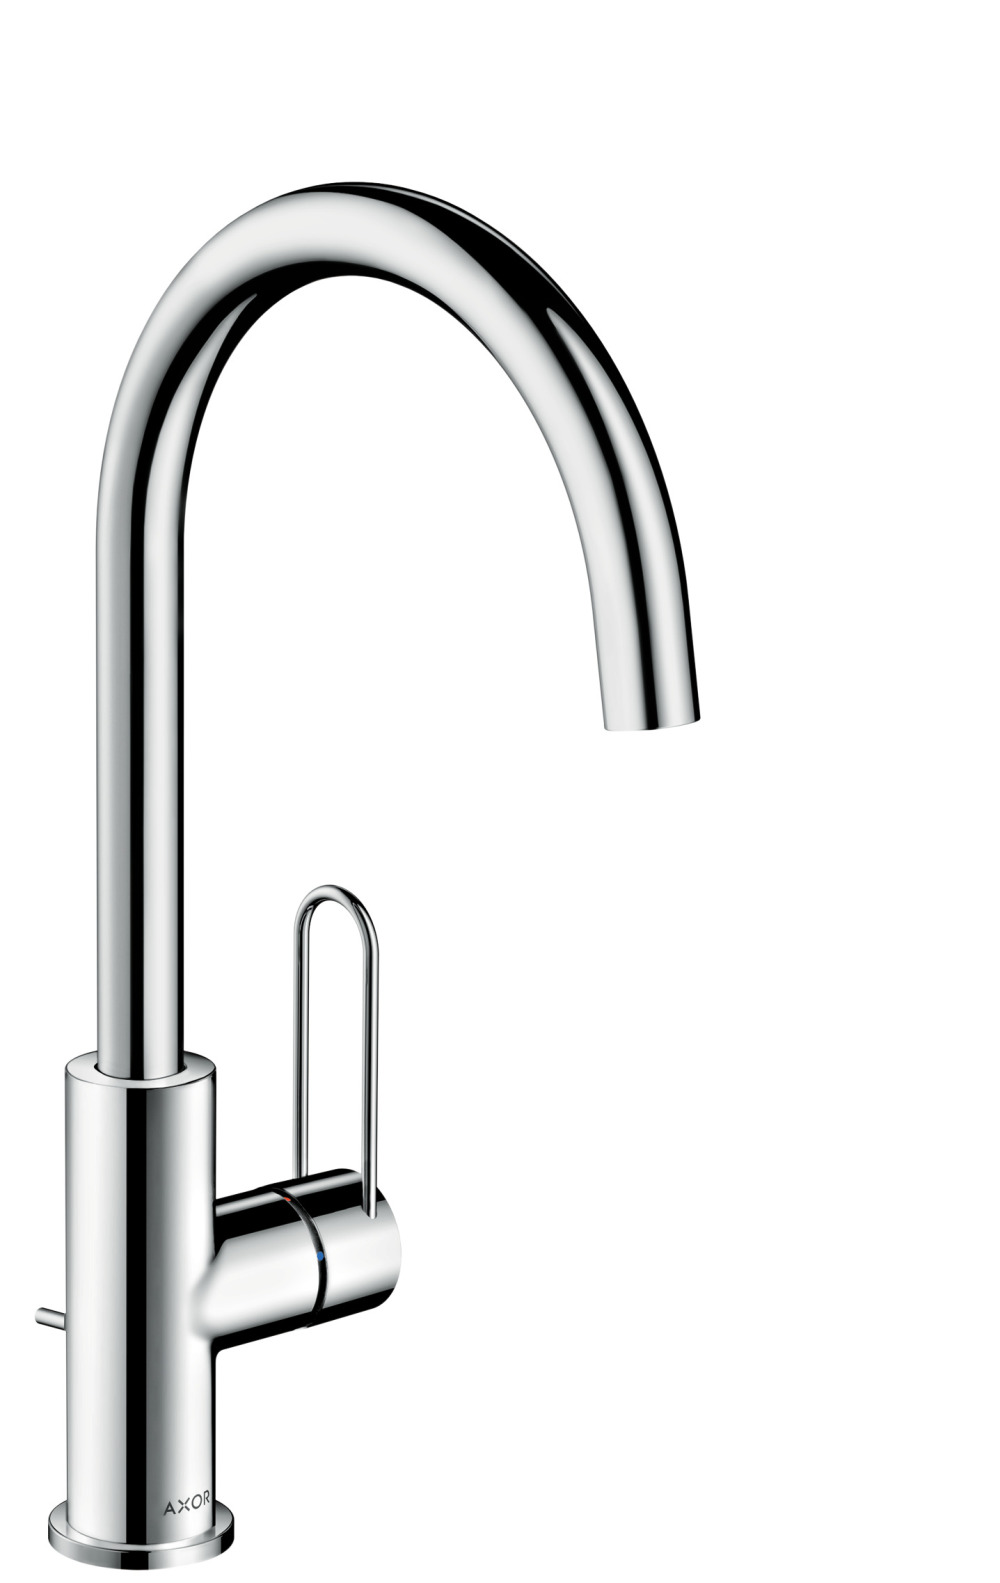 Baterie lavoar Hansgrohe Axor Uno 240 inalta corp 23 8 cm crom